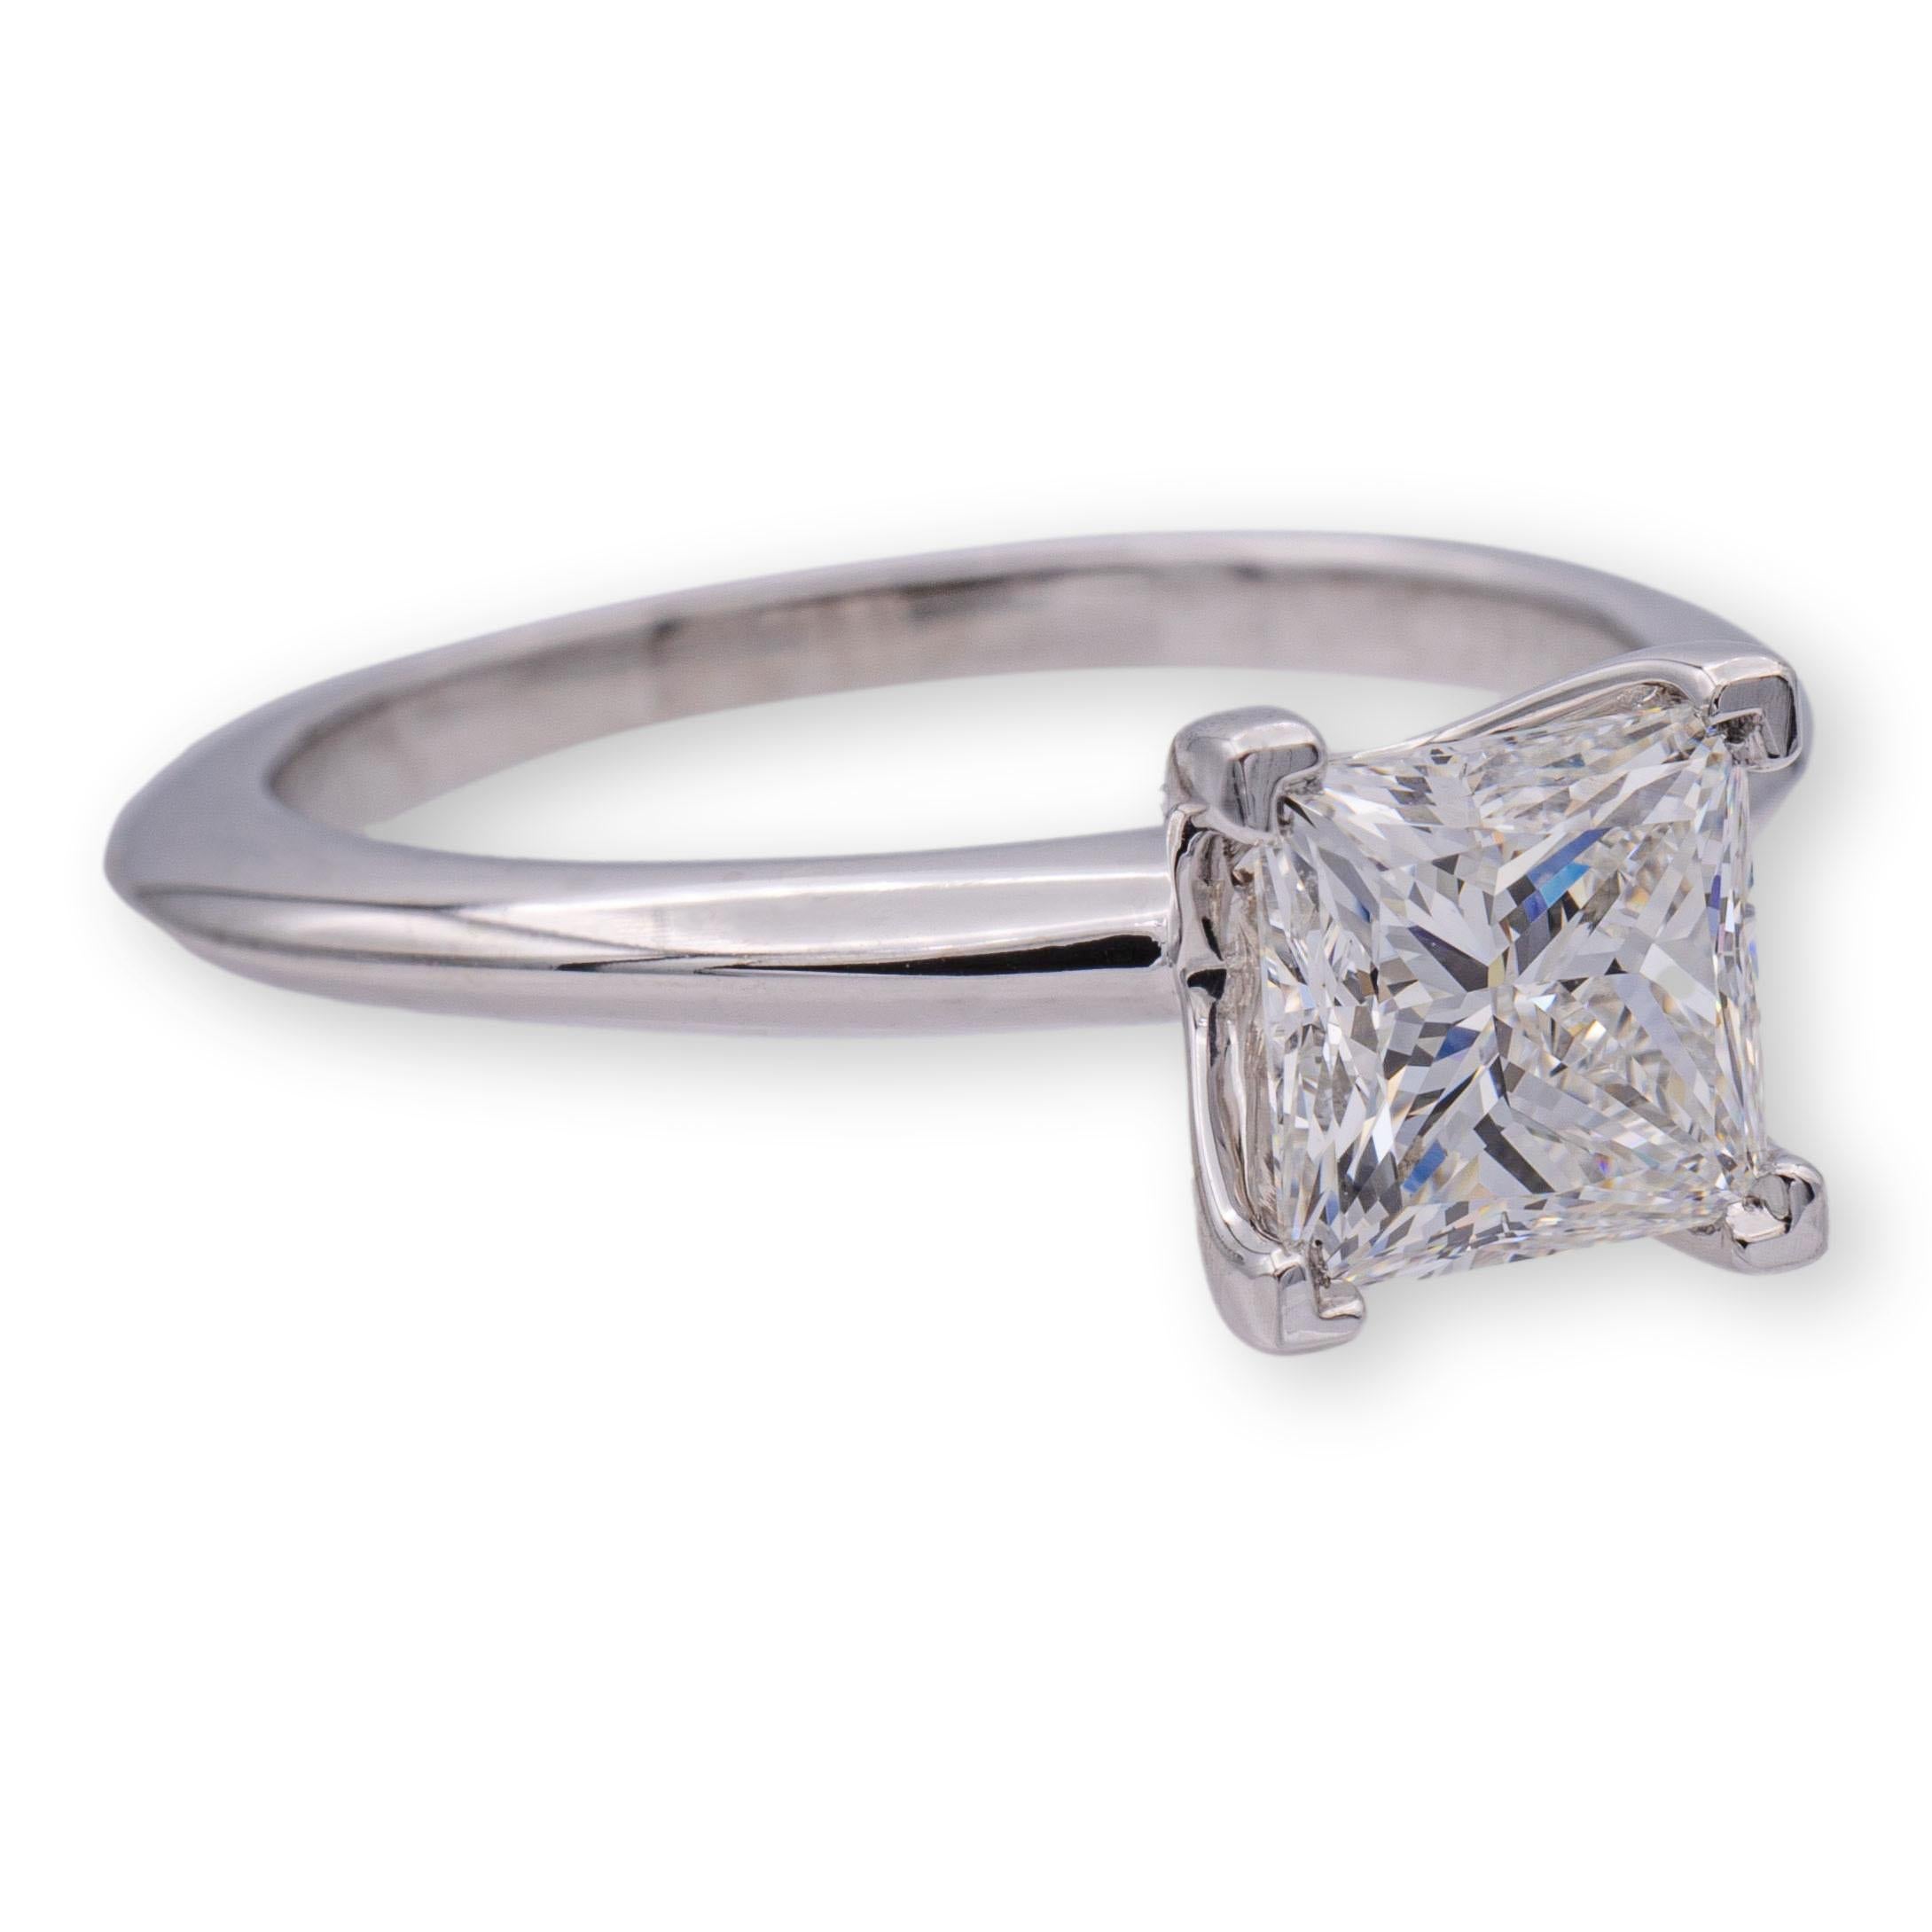 Tiffany & Co. Diamond Engagement ring featuring a princess cut 1.04 ct Center, graded F color and VS1 Clarity finely crafted in Platinum.  This diamond Includes an Original Tiffany certificate. Ring is fully hallmarked with Tiffany logos, serial